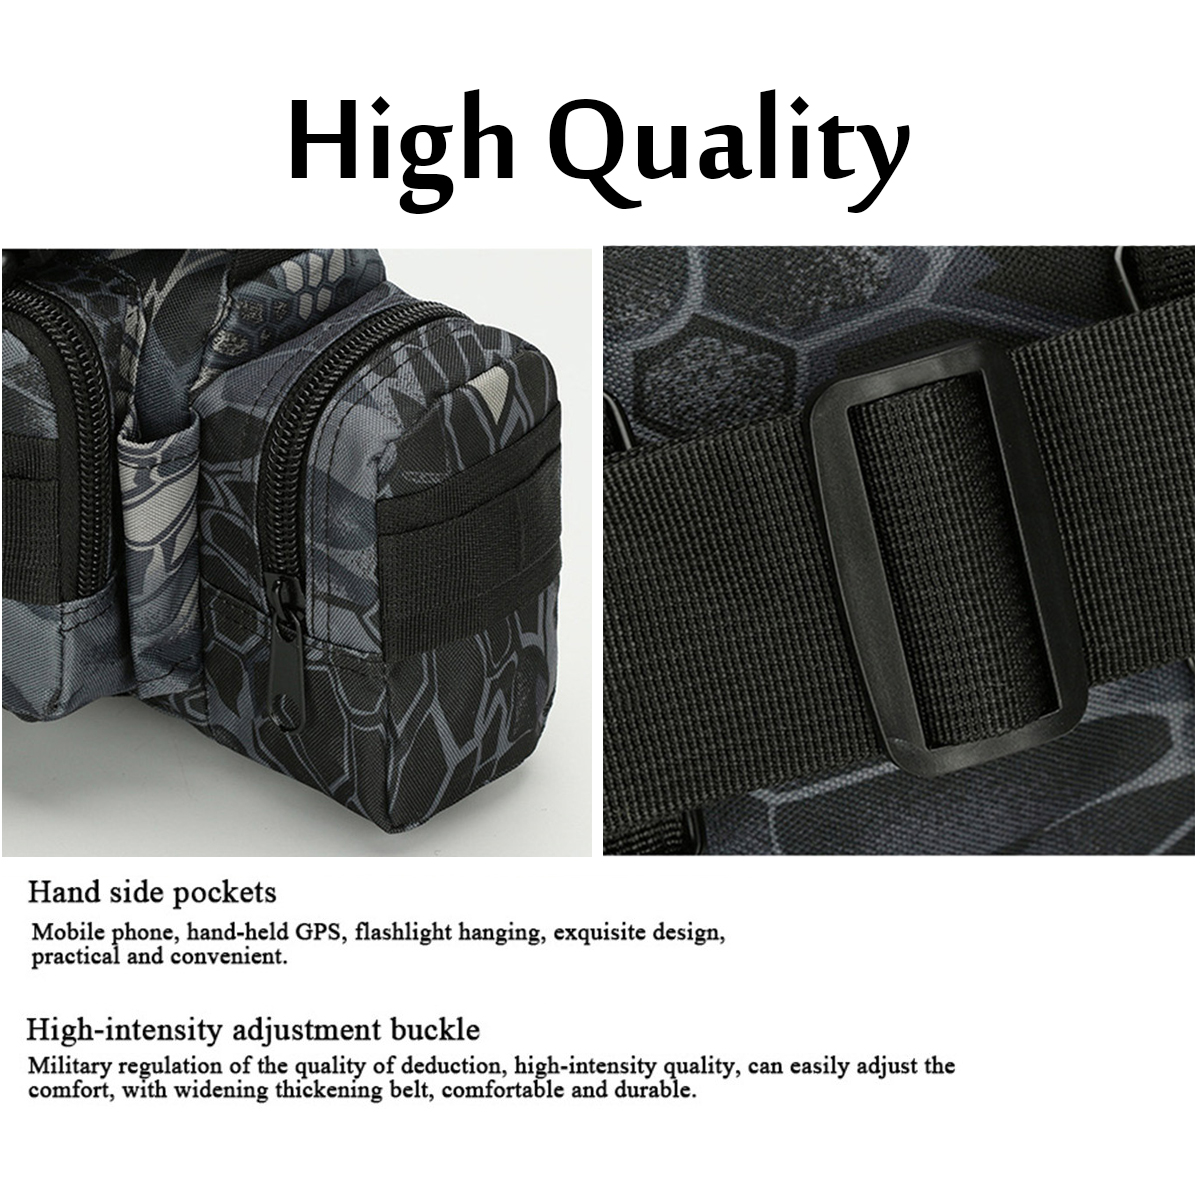 Multifunctional-Outdoor-Sports-Hiking-with-Zippers-Nylon-Oxford-Cloth-Tactical-Shoulder-Bag-Waist-Pa-1825563-24